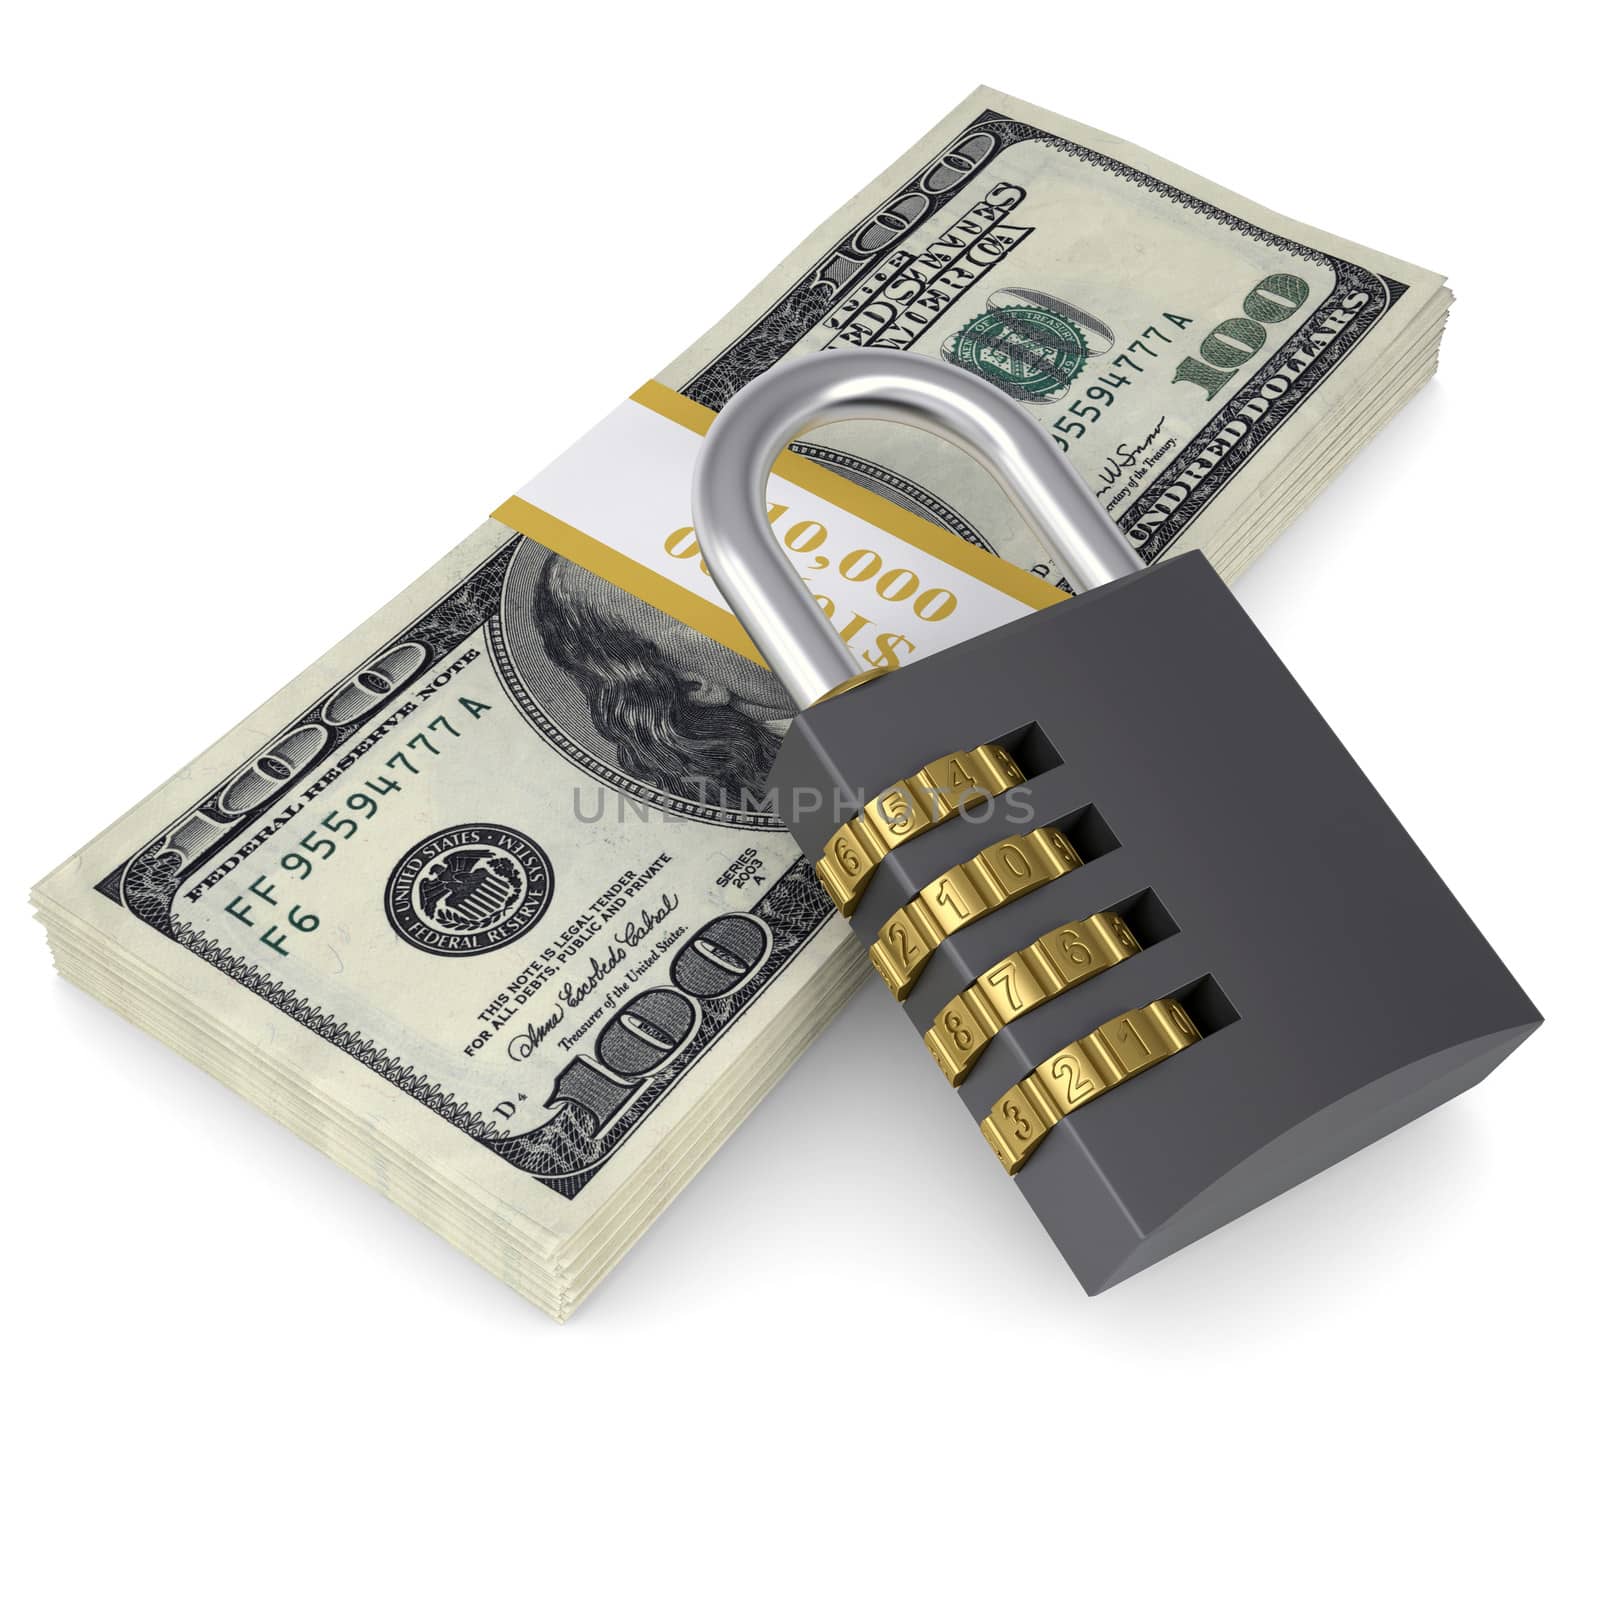 Combination lock on a pack of dollars by cherezoff